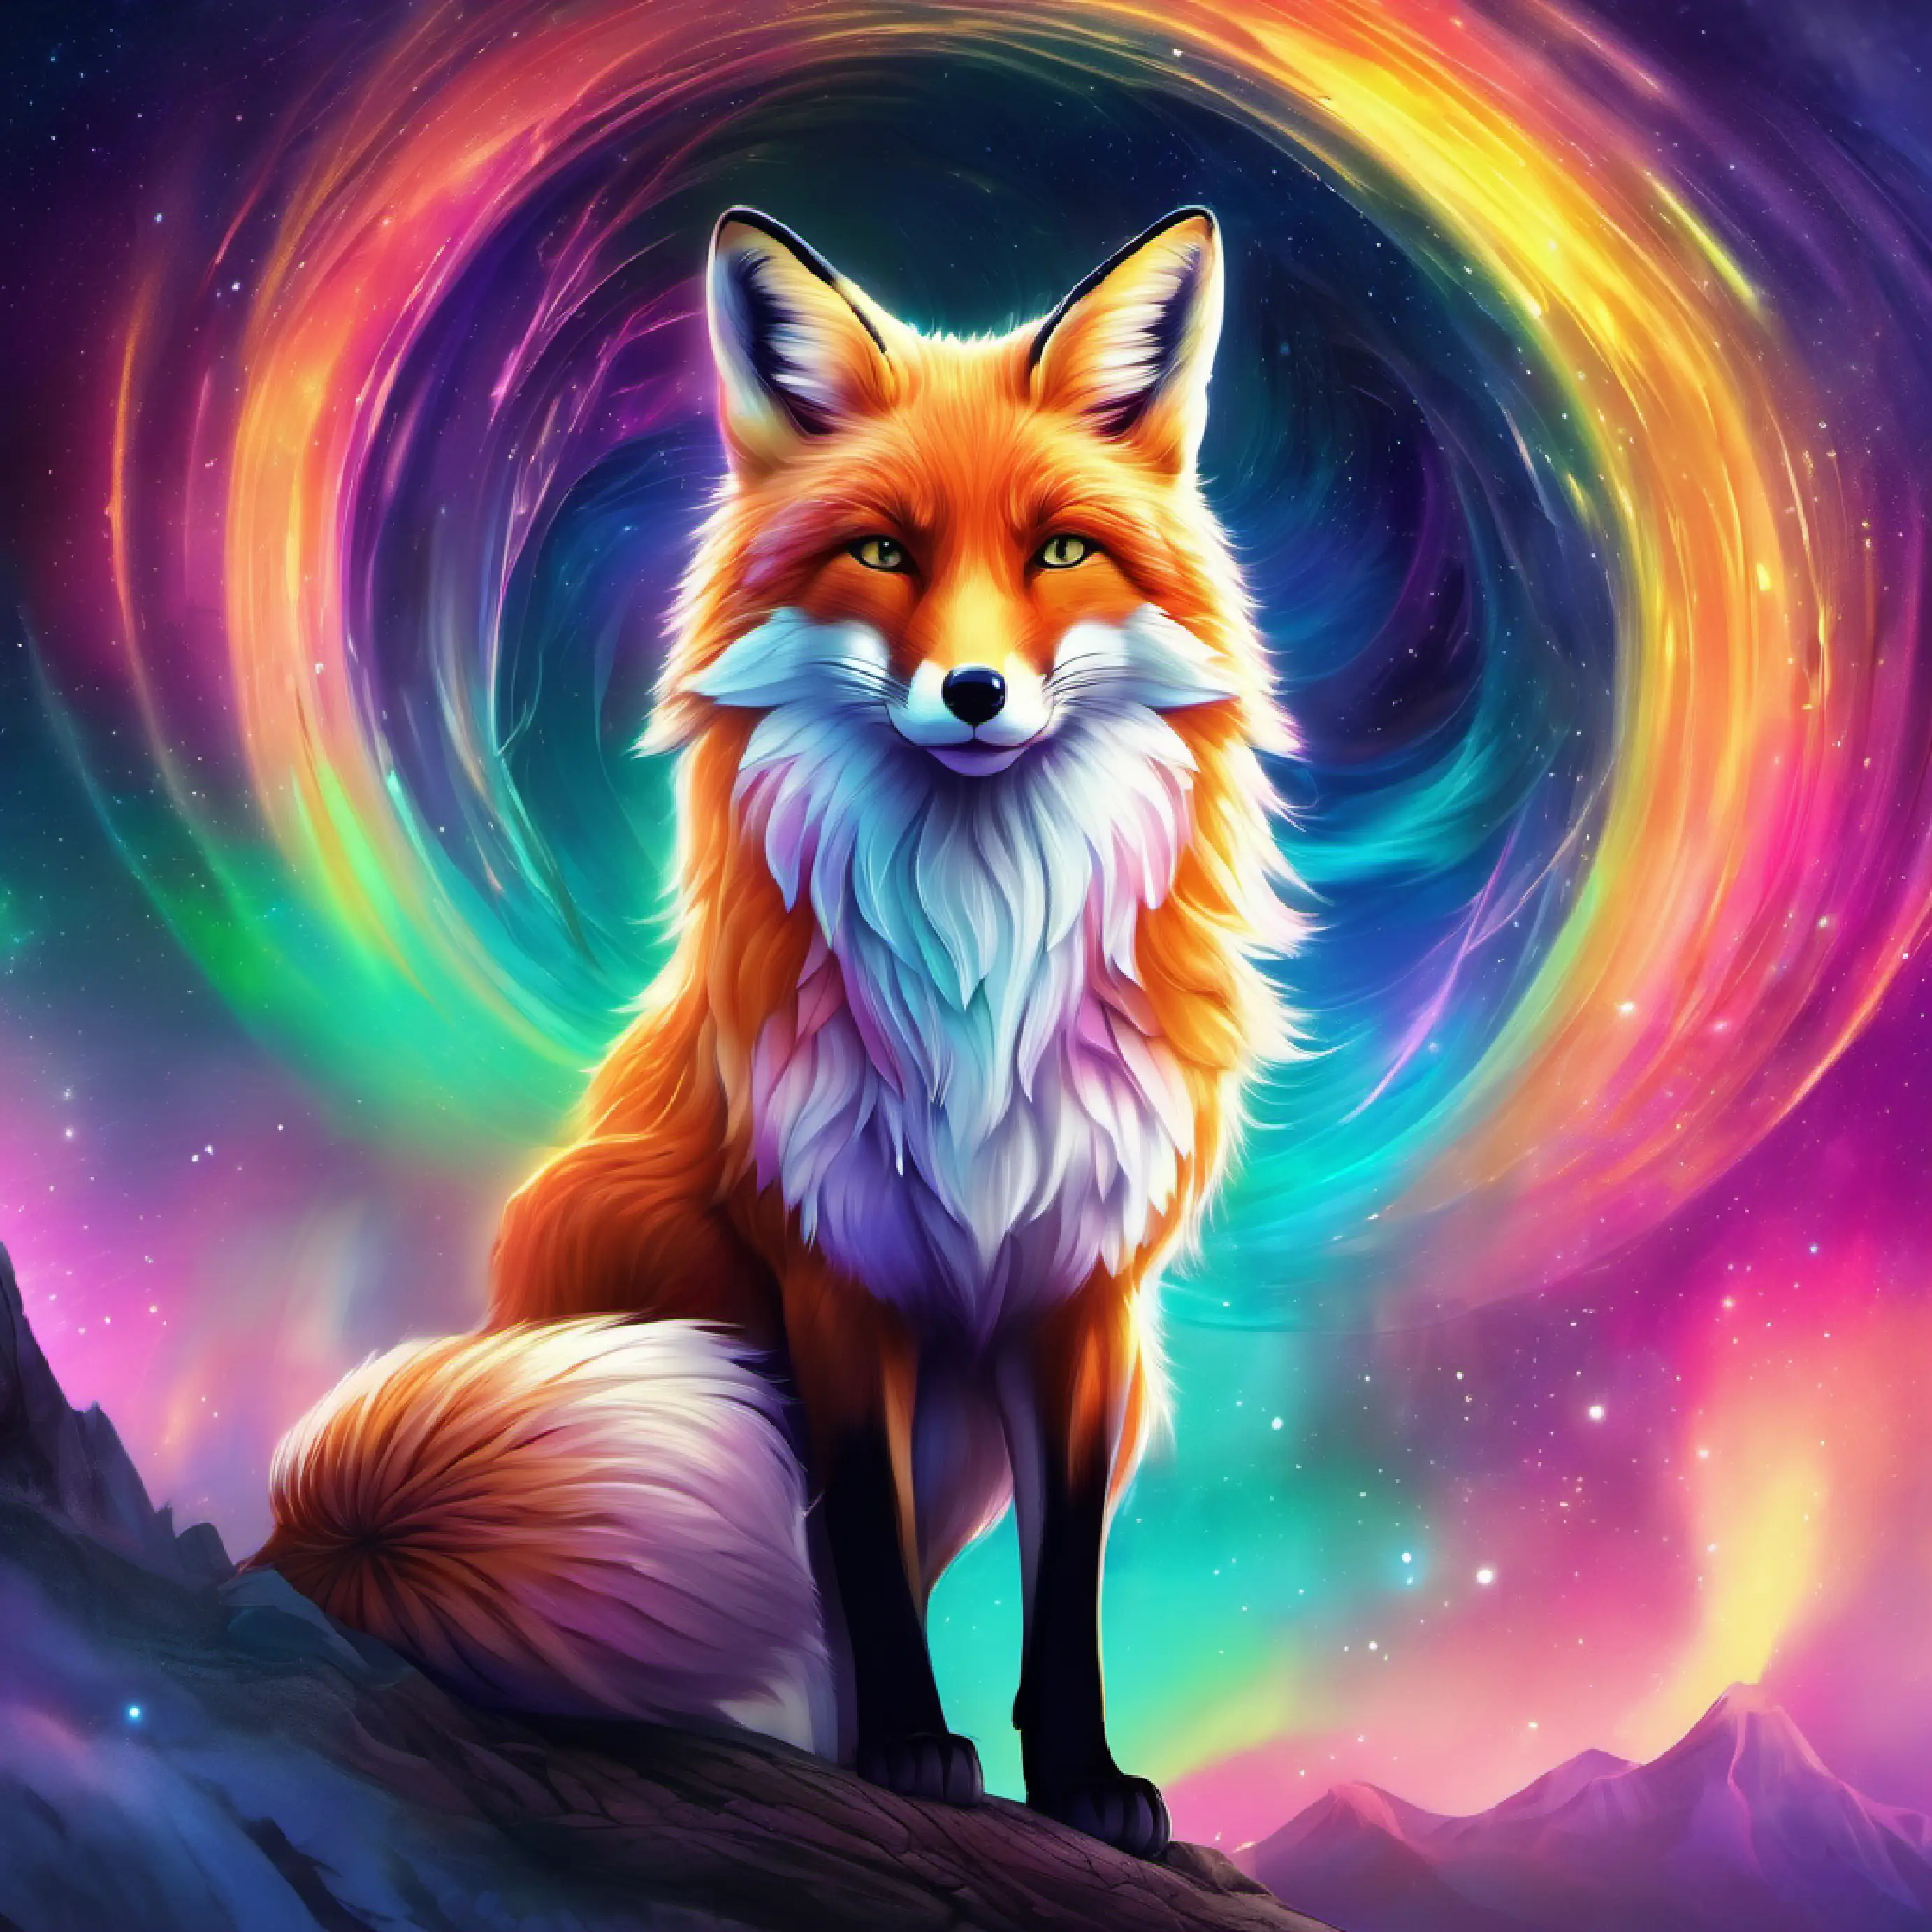 Fox meets Aurora Spirit with ever-changing colorful aura, wise and kind, the Aurora Spirit.